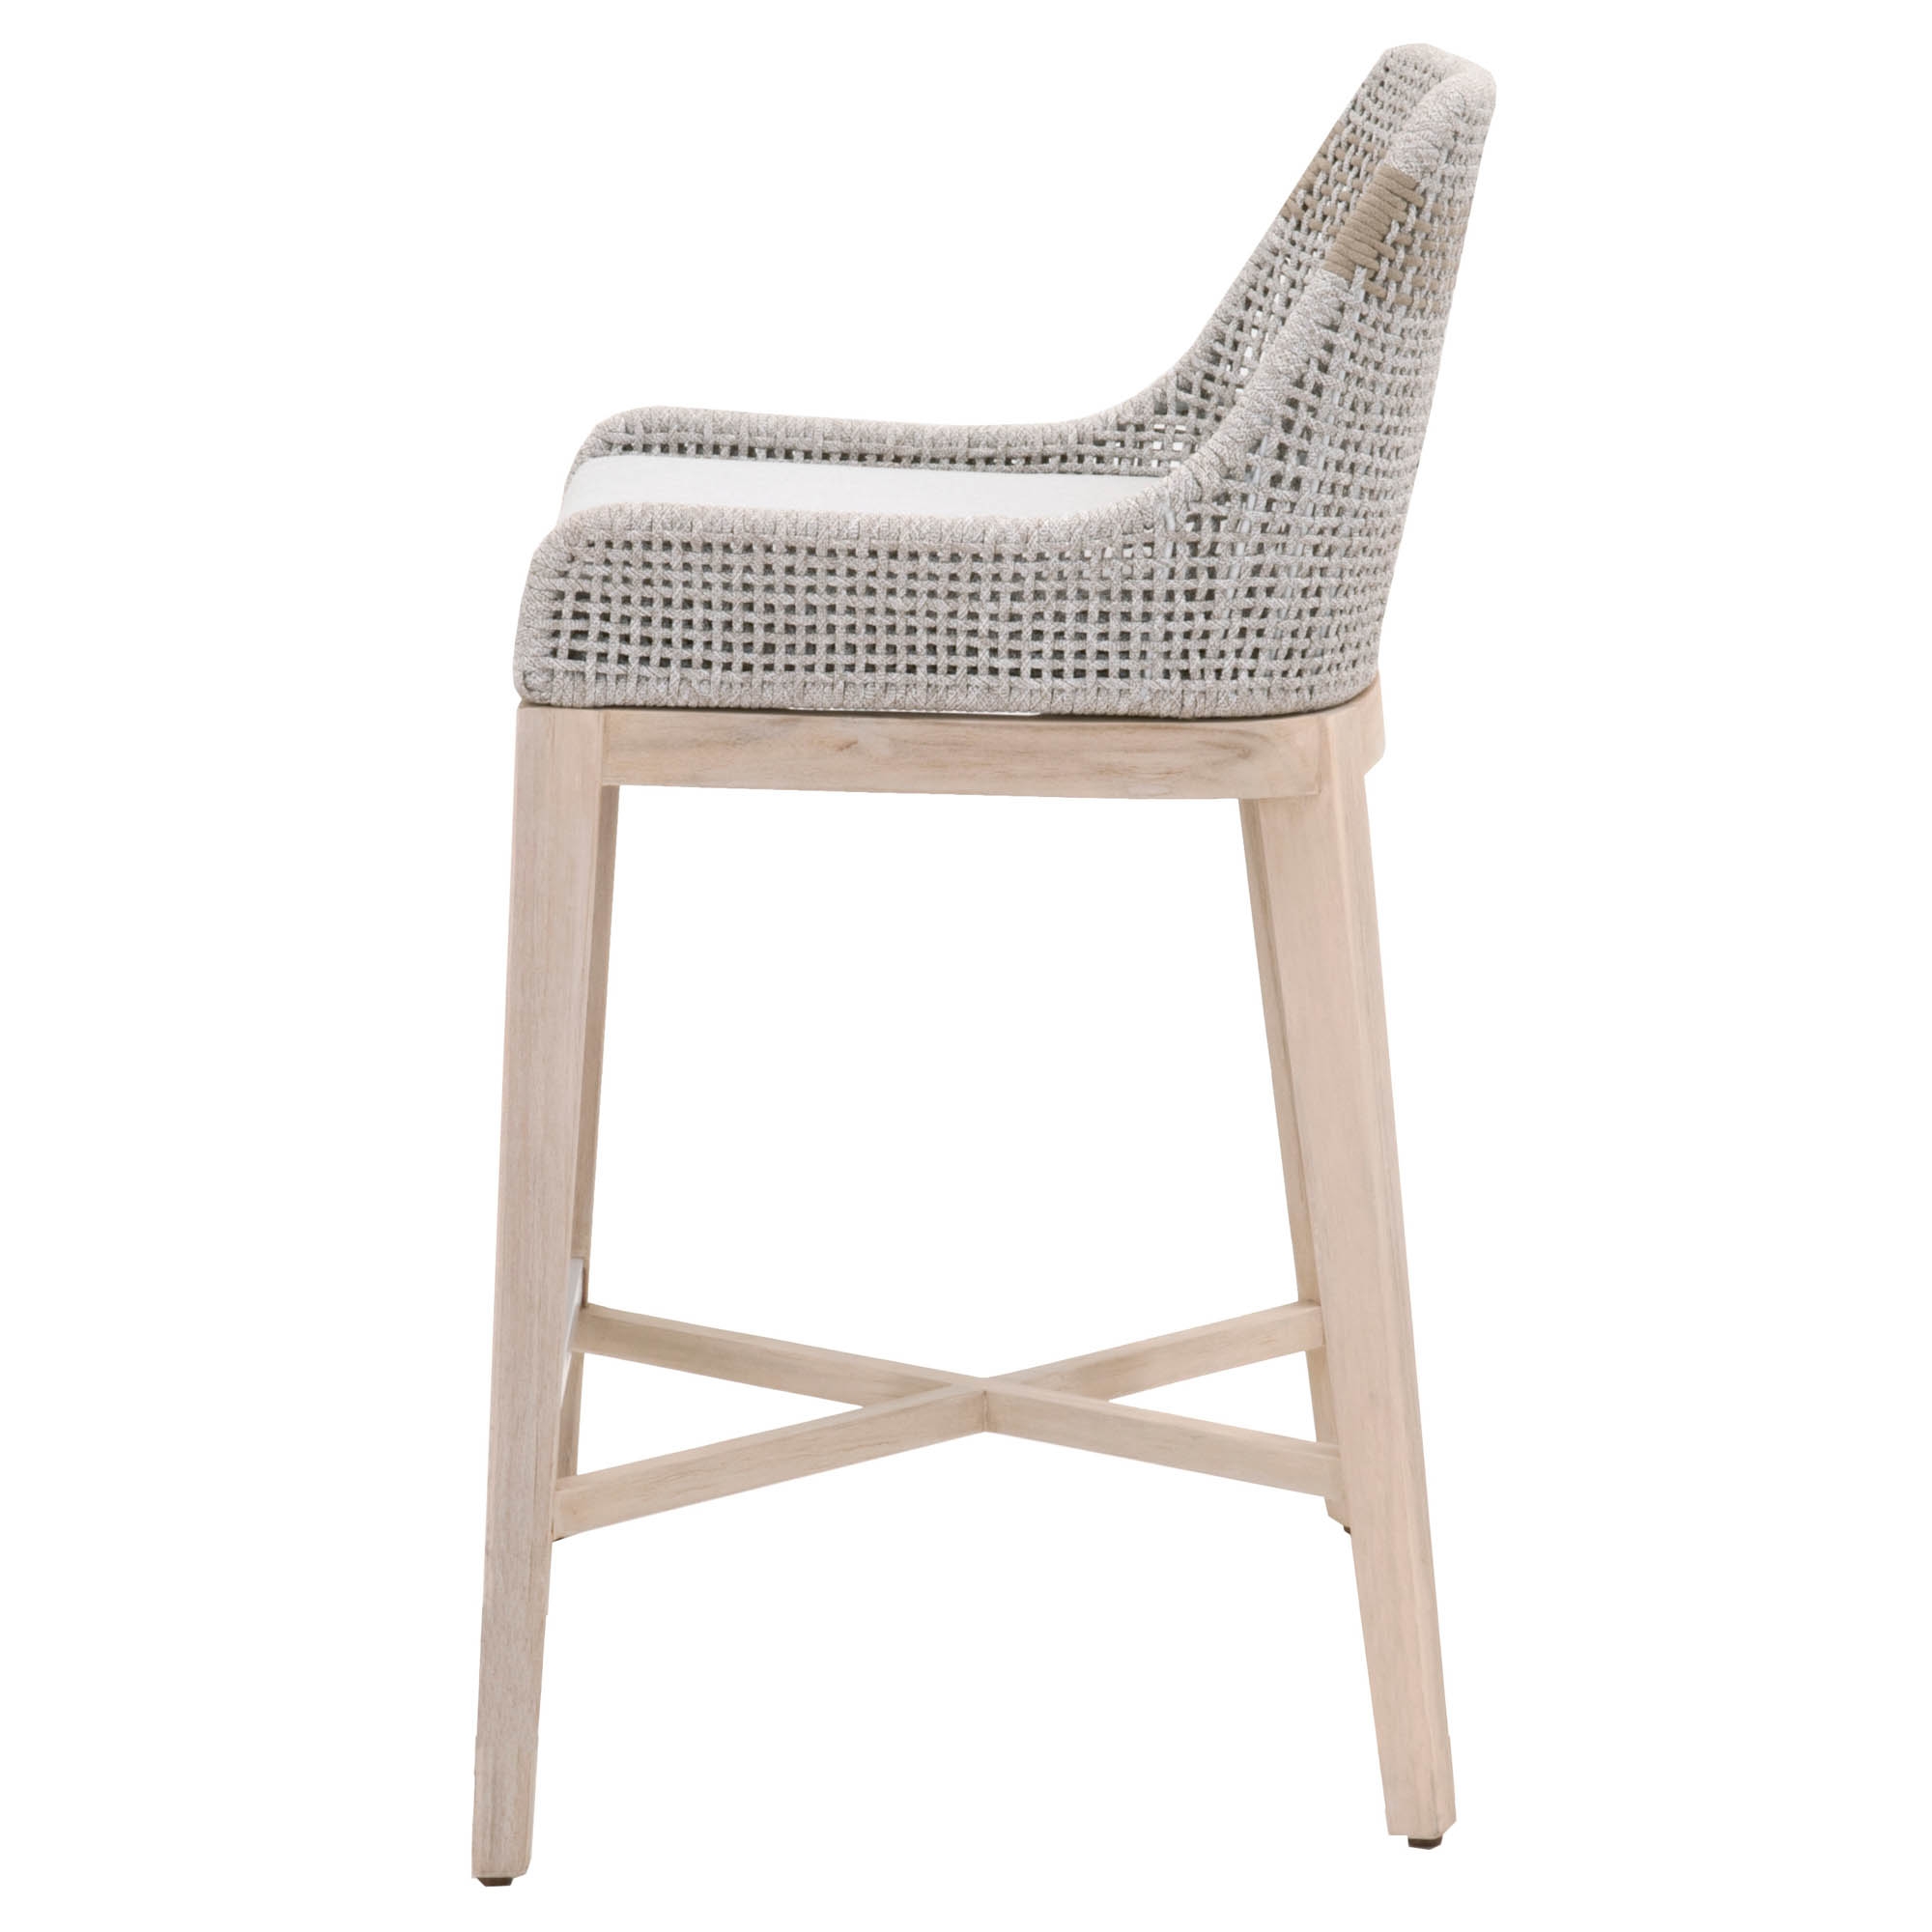 Tapestry Outdoor Barstool, Gray - Image 2